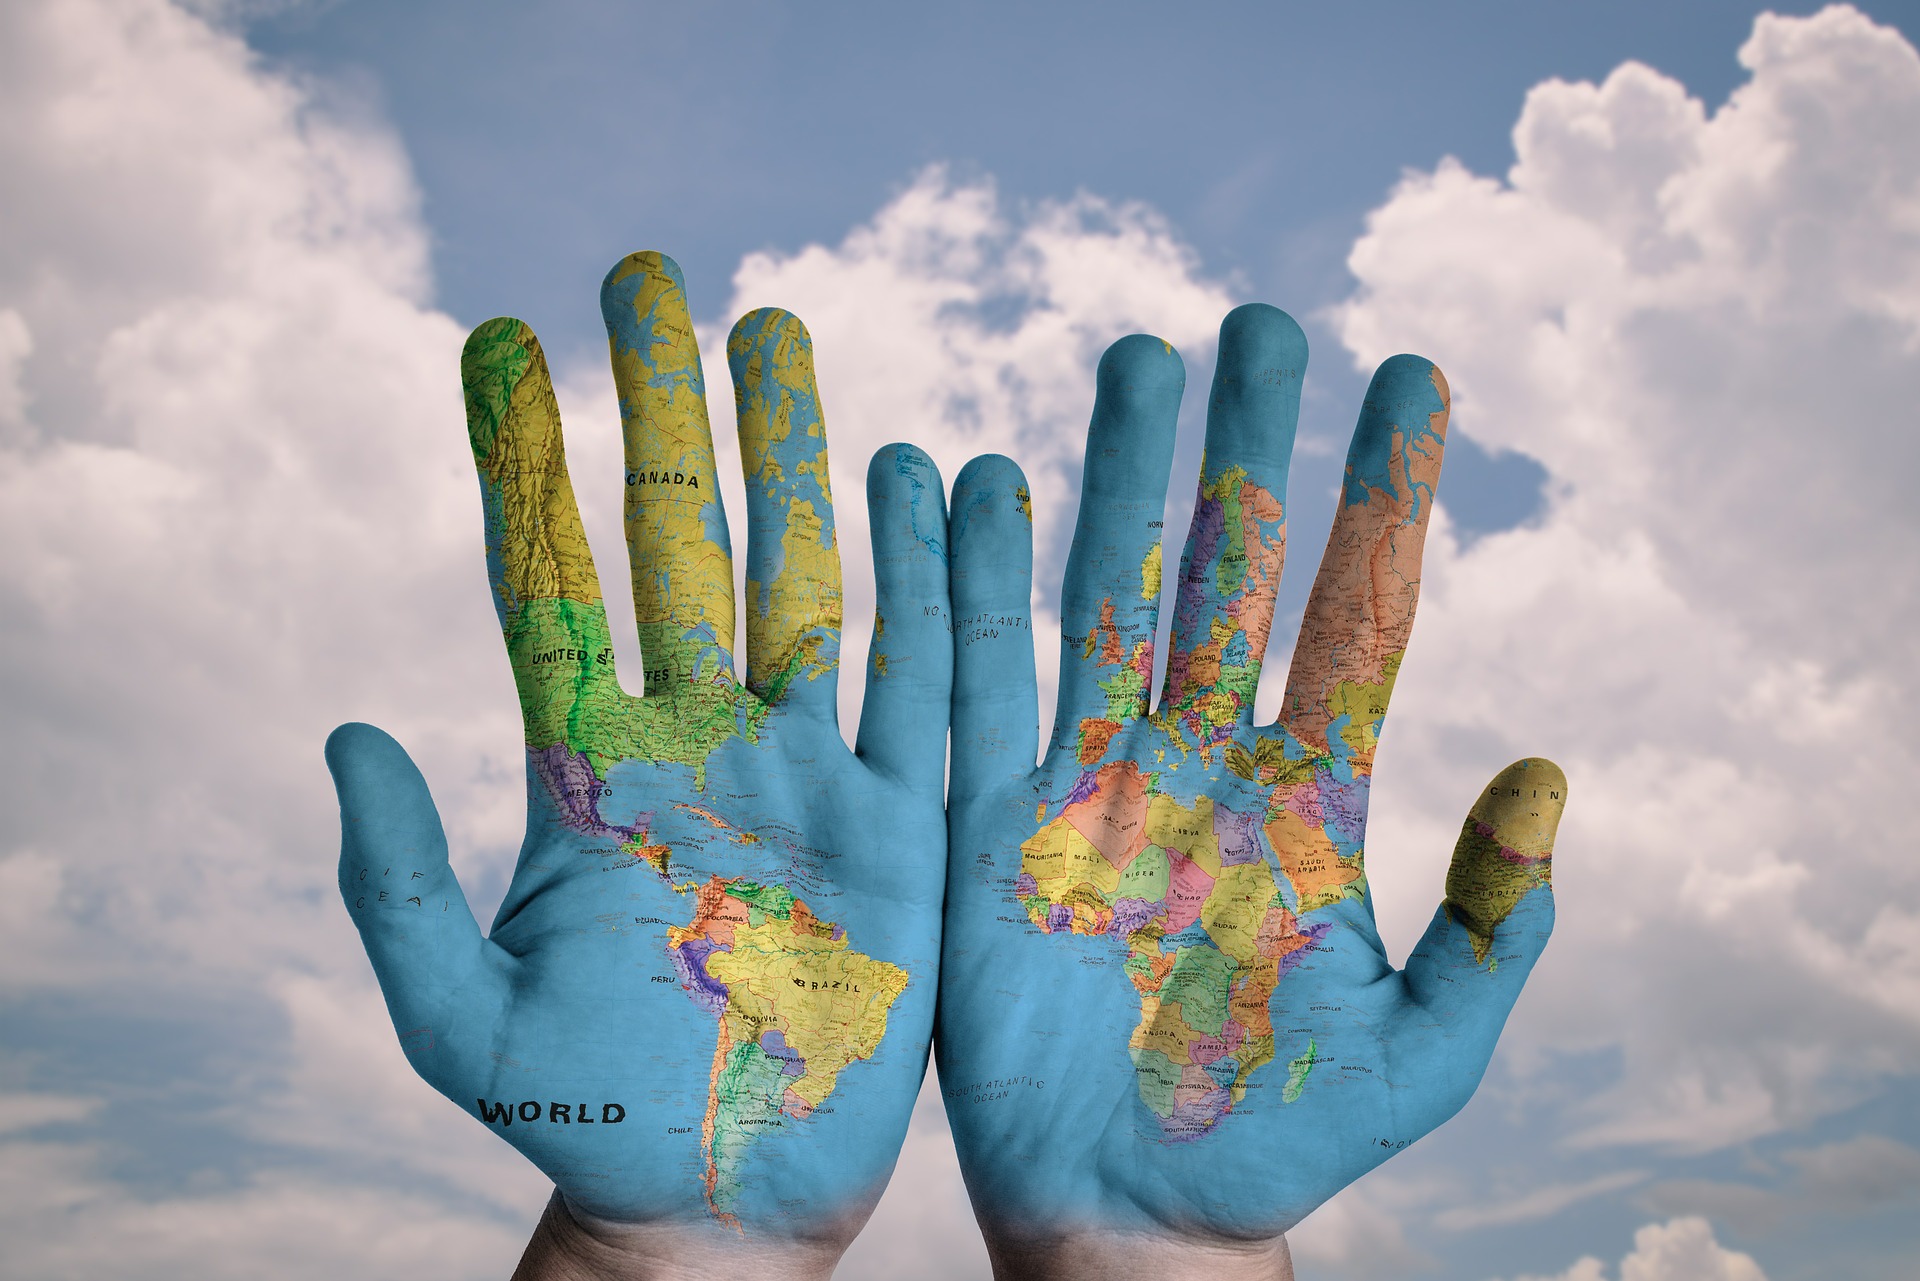 World Map painted on hands with a backdrop of puffy white clouds and blue skies.